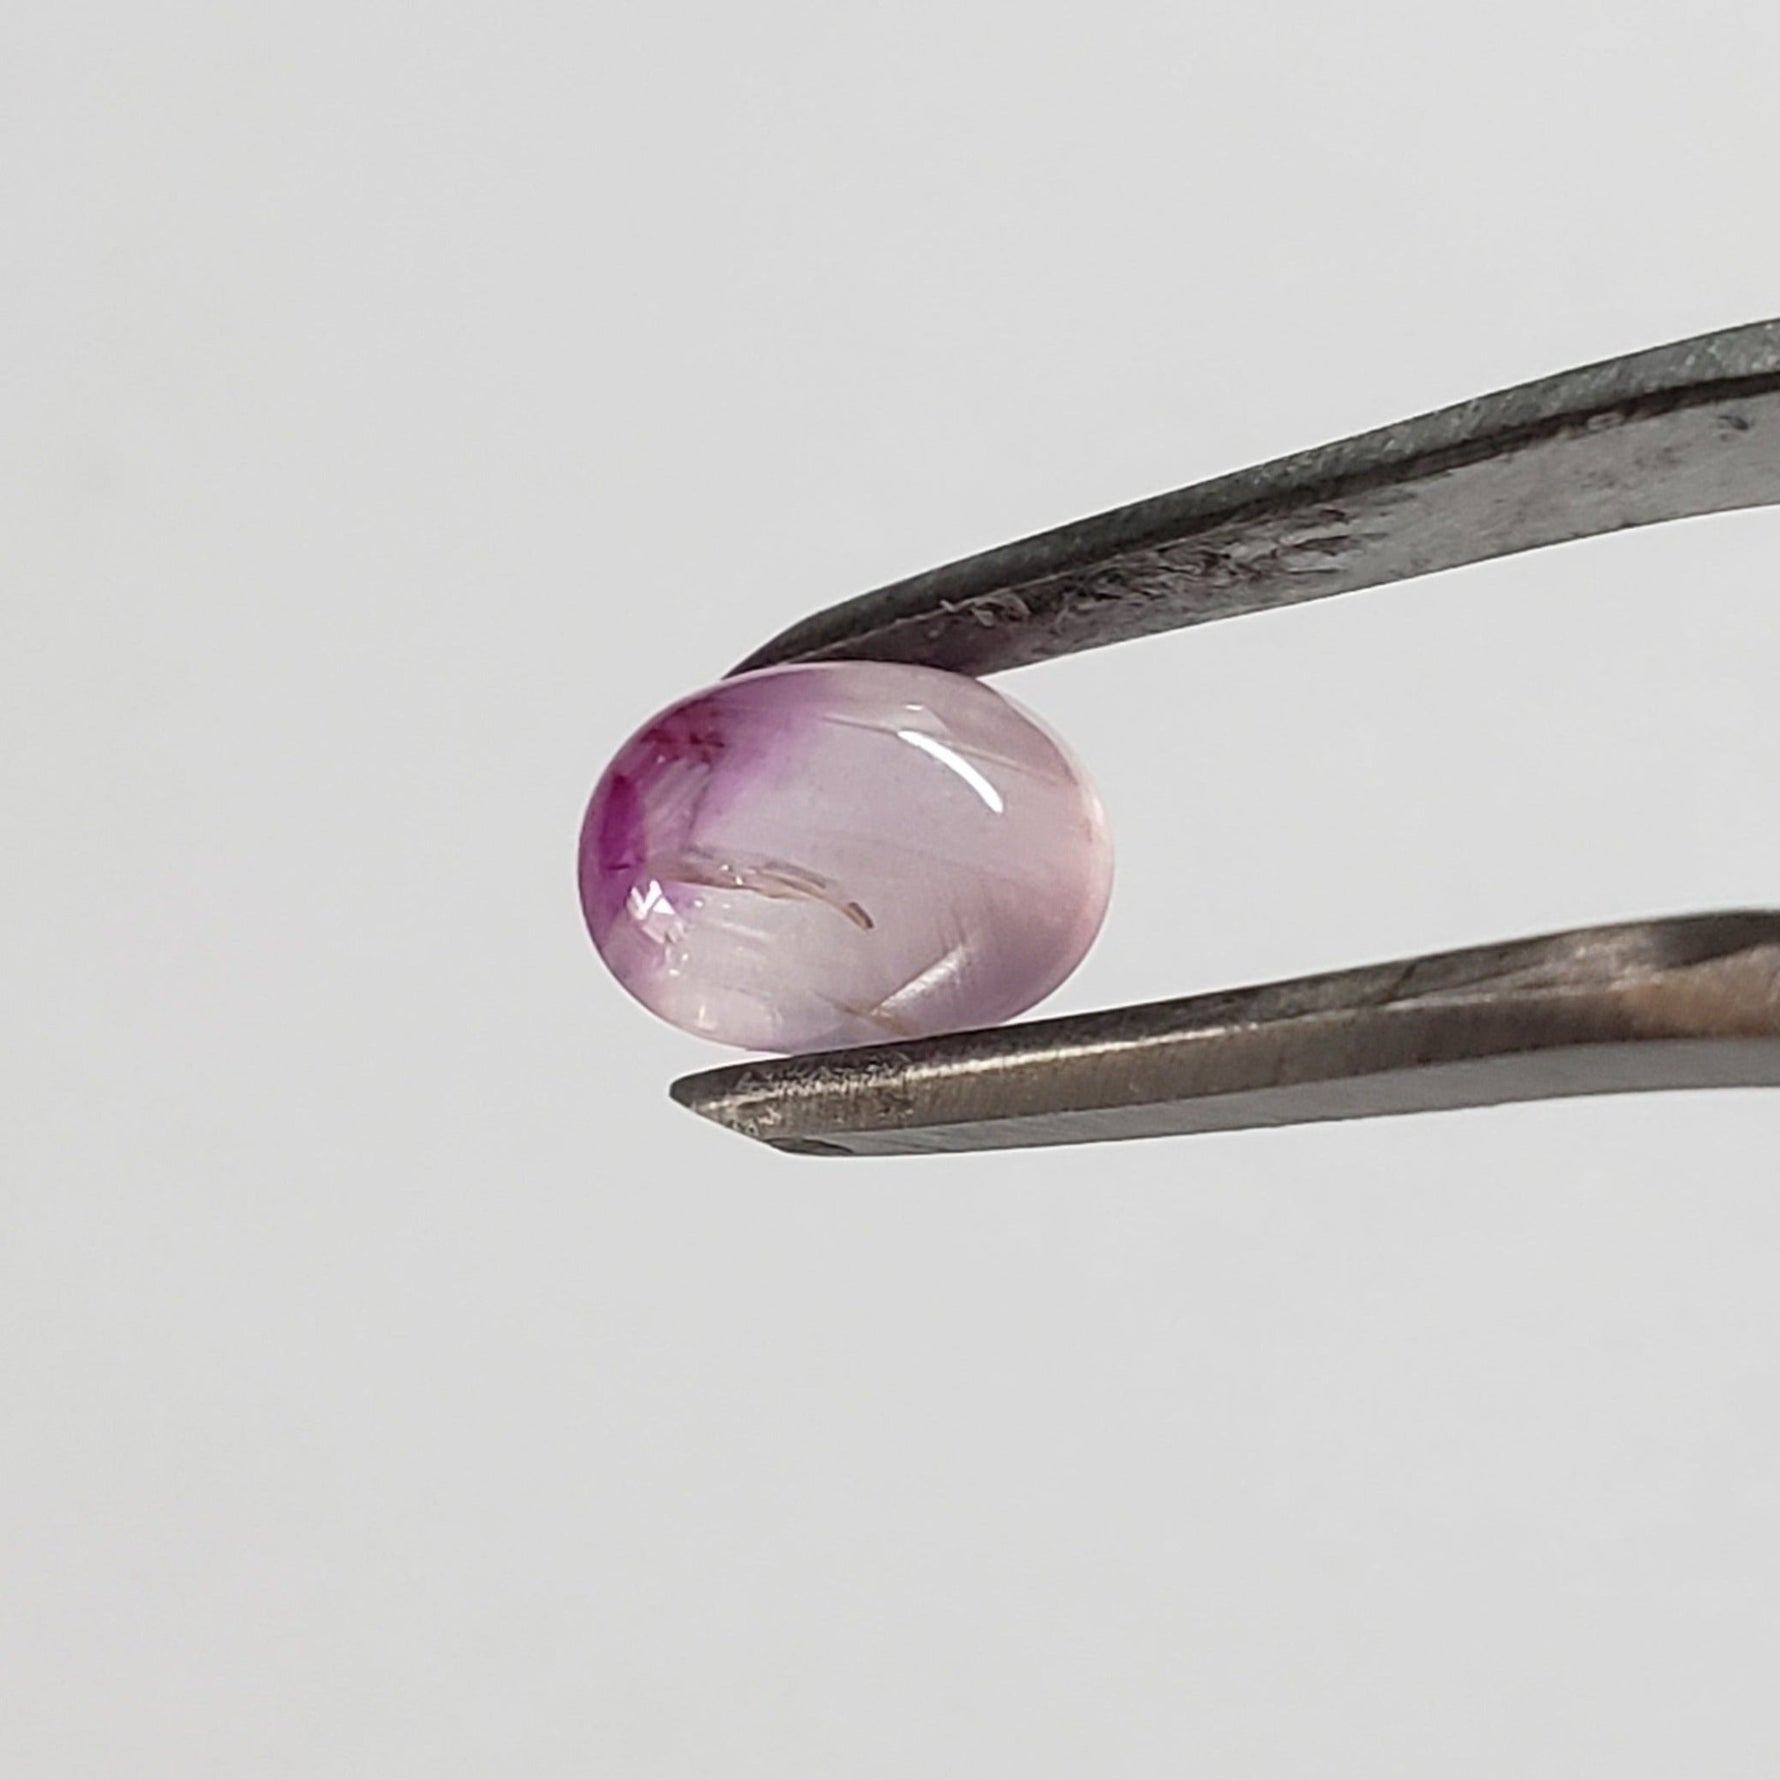 Star Sapphire | Oval Cabochon | Pink | 6.7x5.1mm 1.5ct | Myanmar